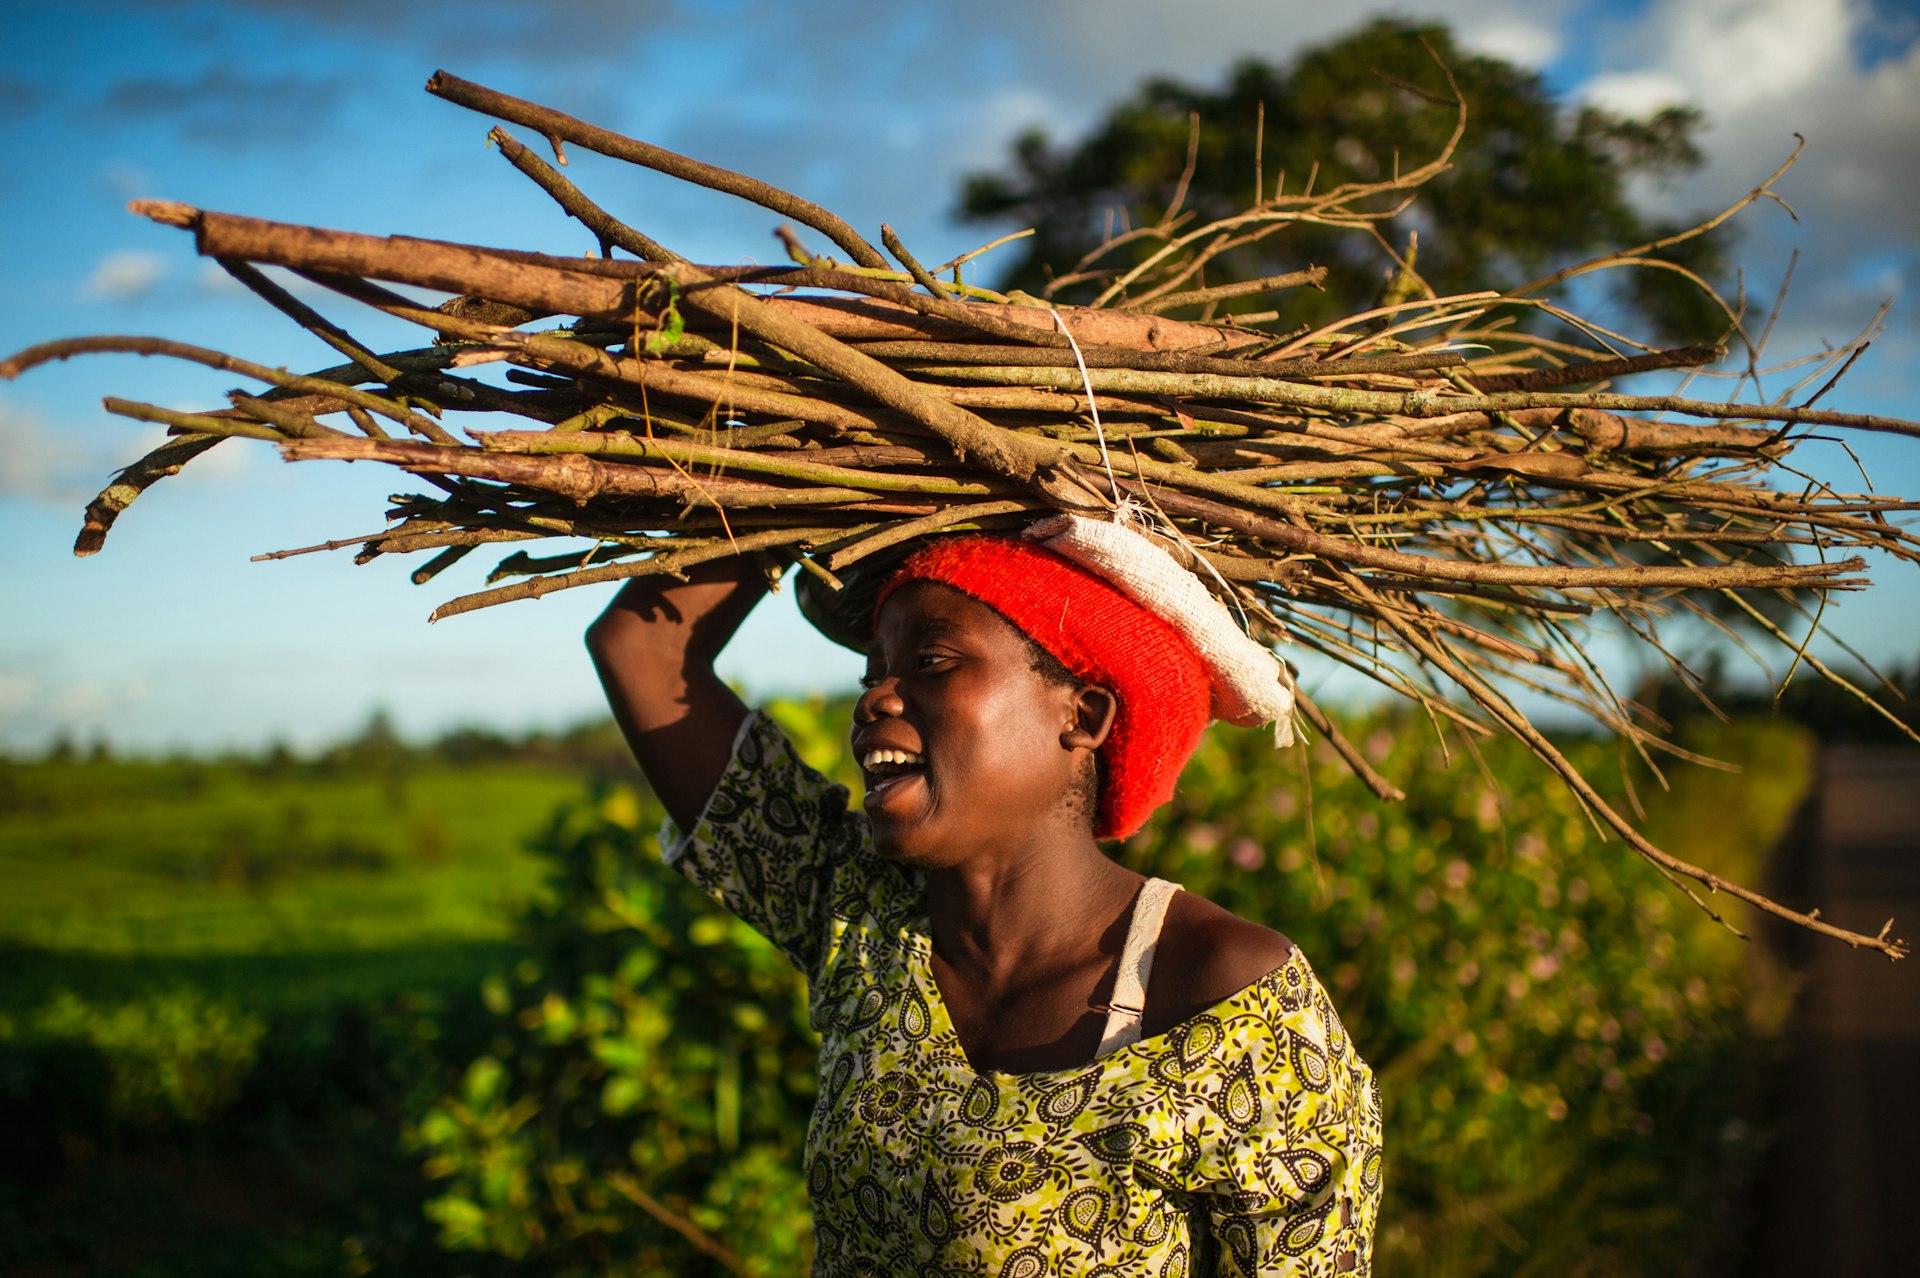 A Young African woman carrying a bundle of firewood on her head next to a tea plantation